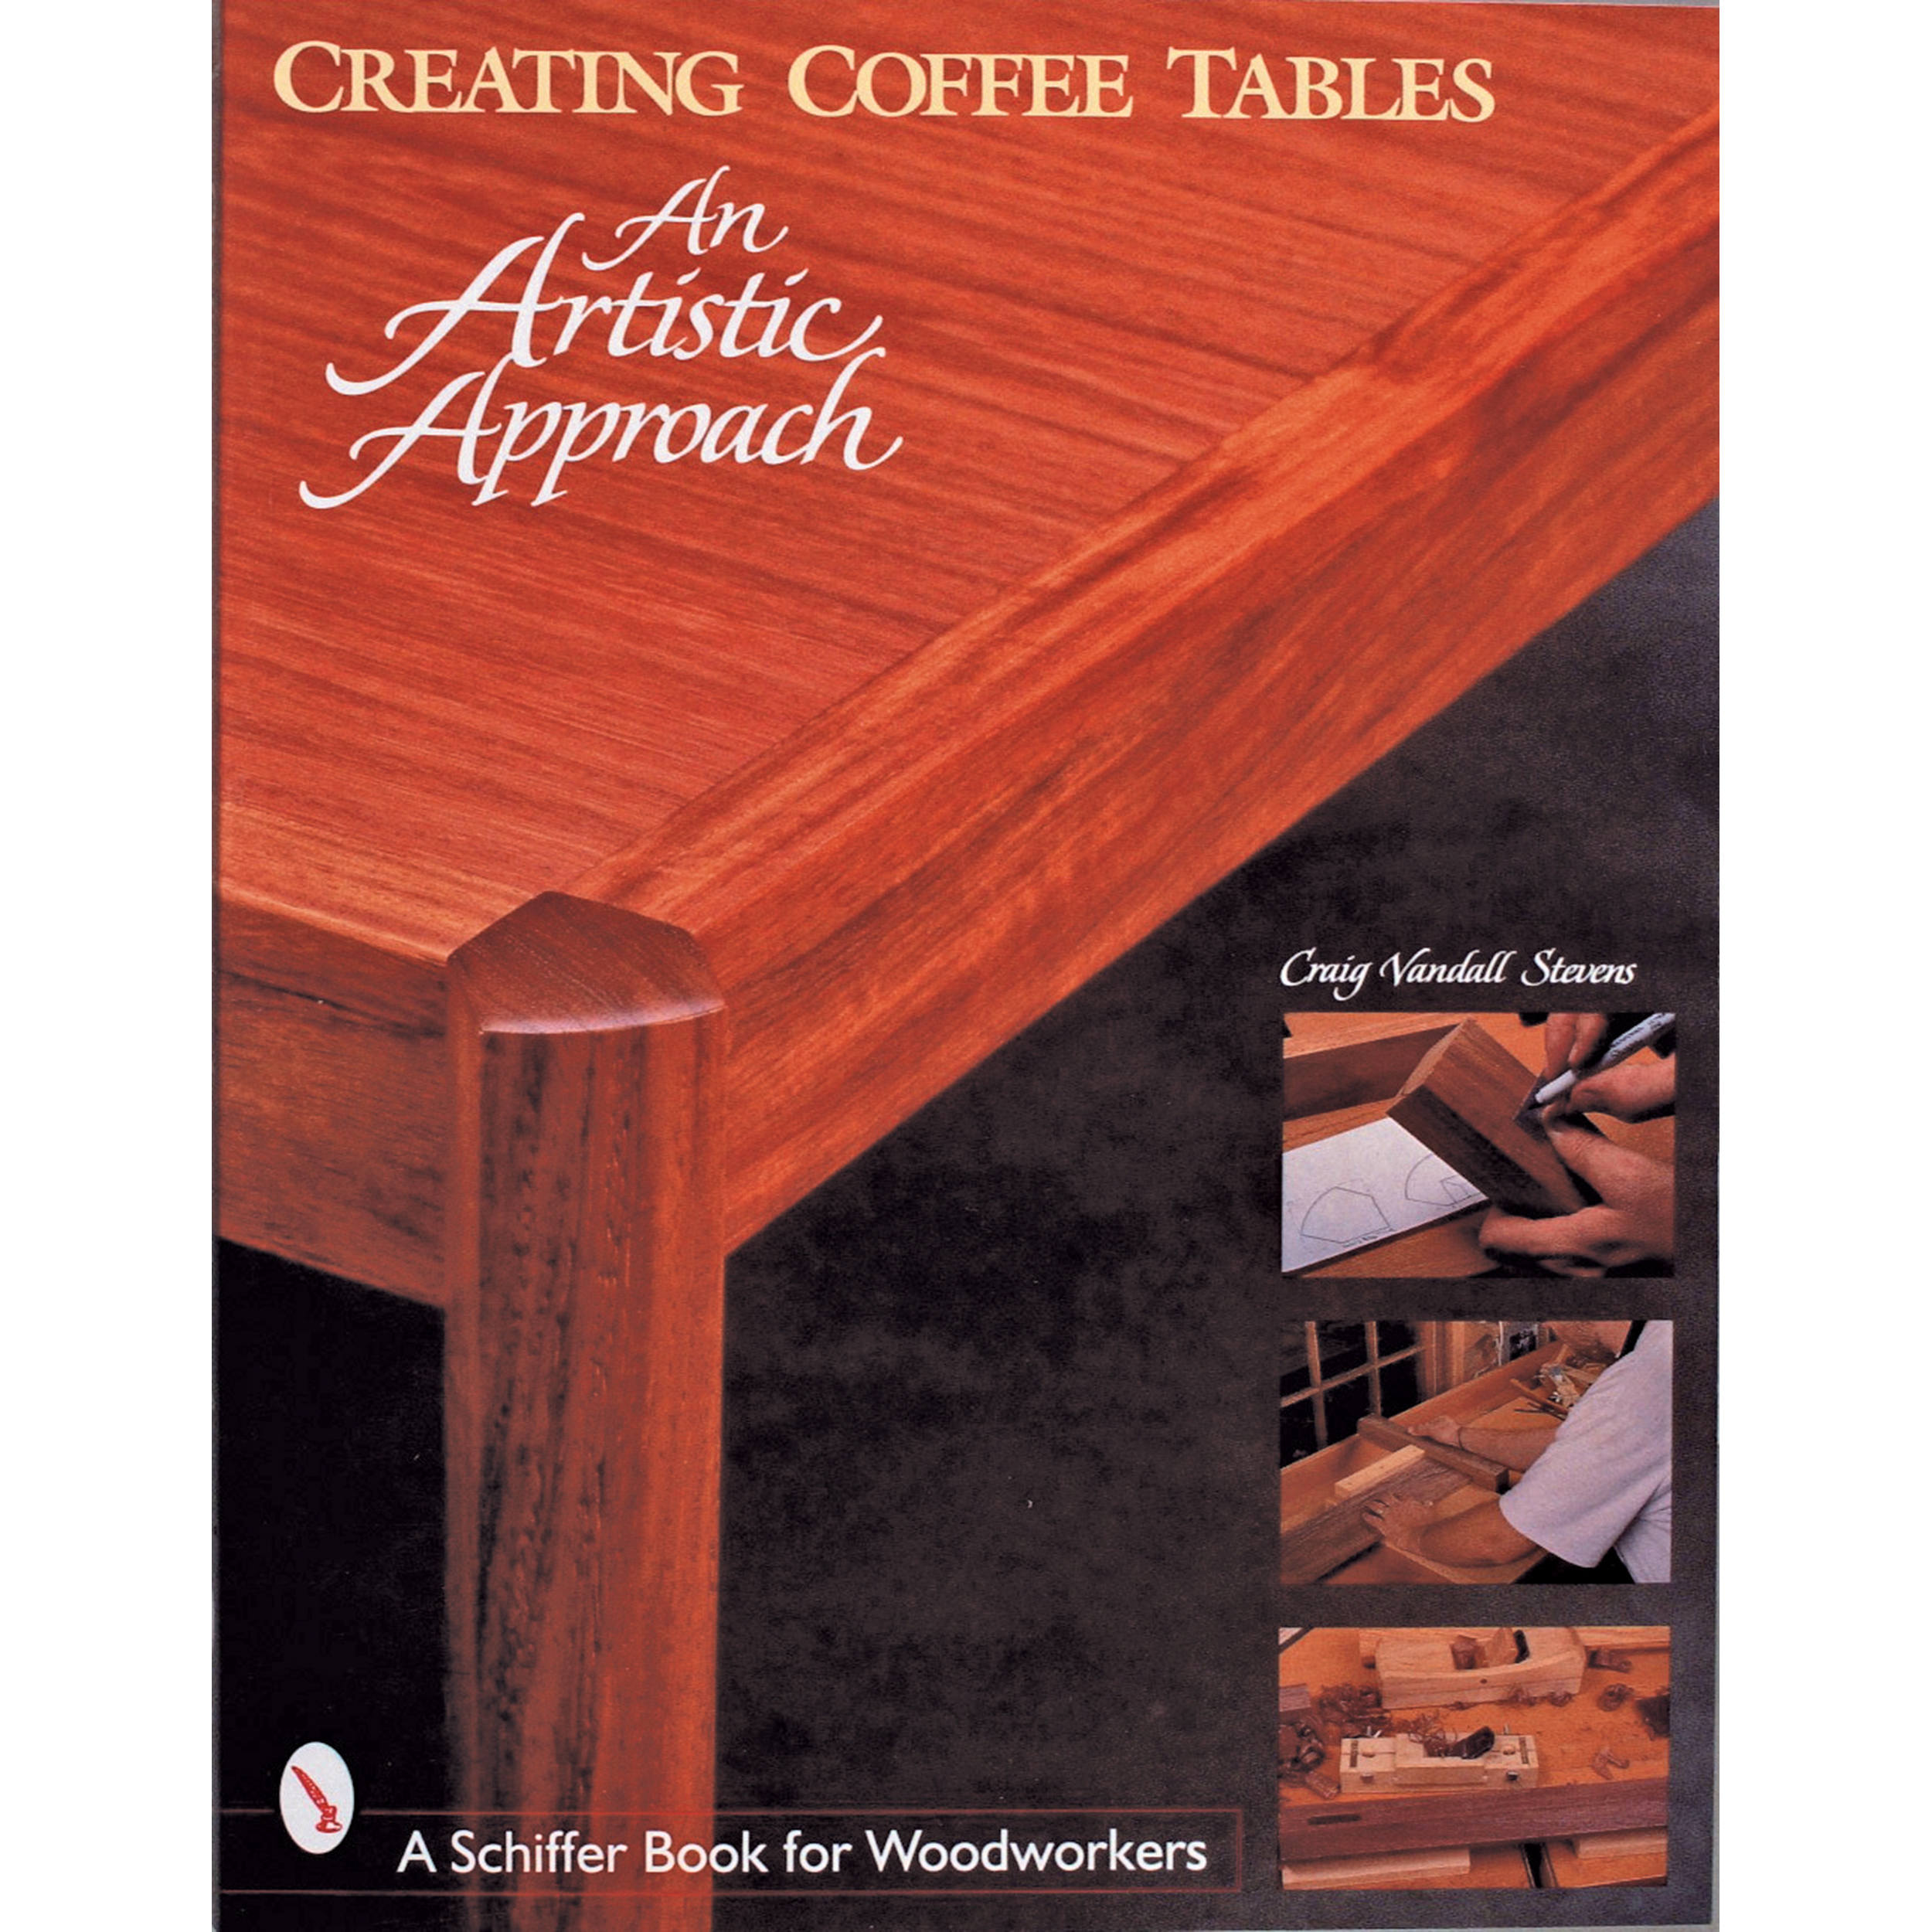 Creating Coffee Tables: An Artistic Approach